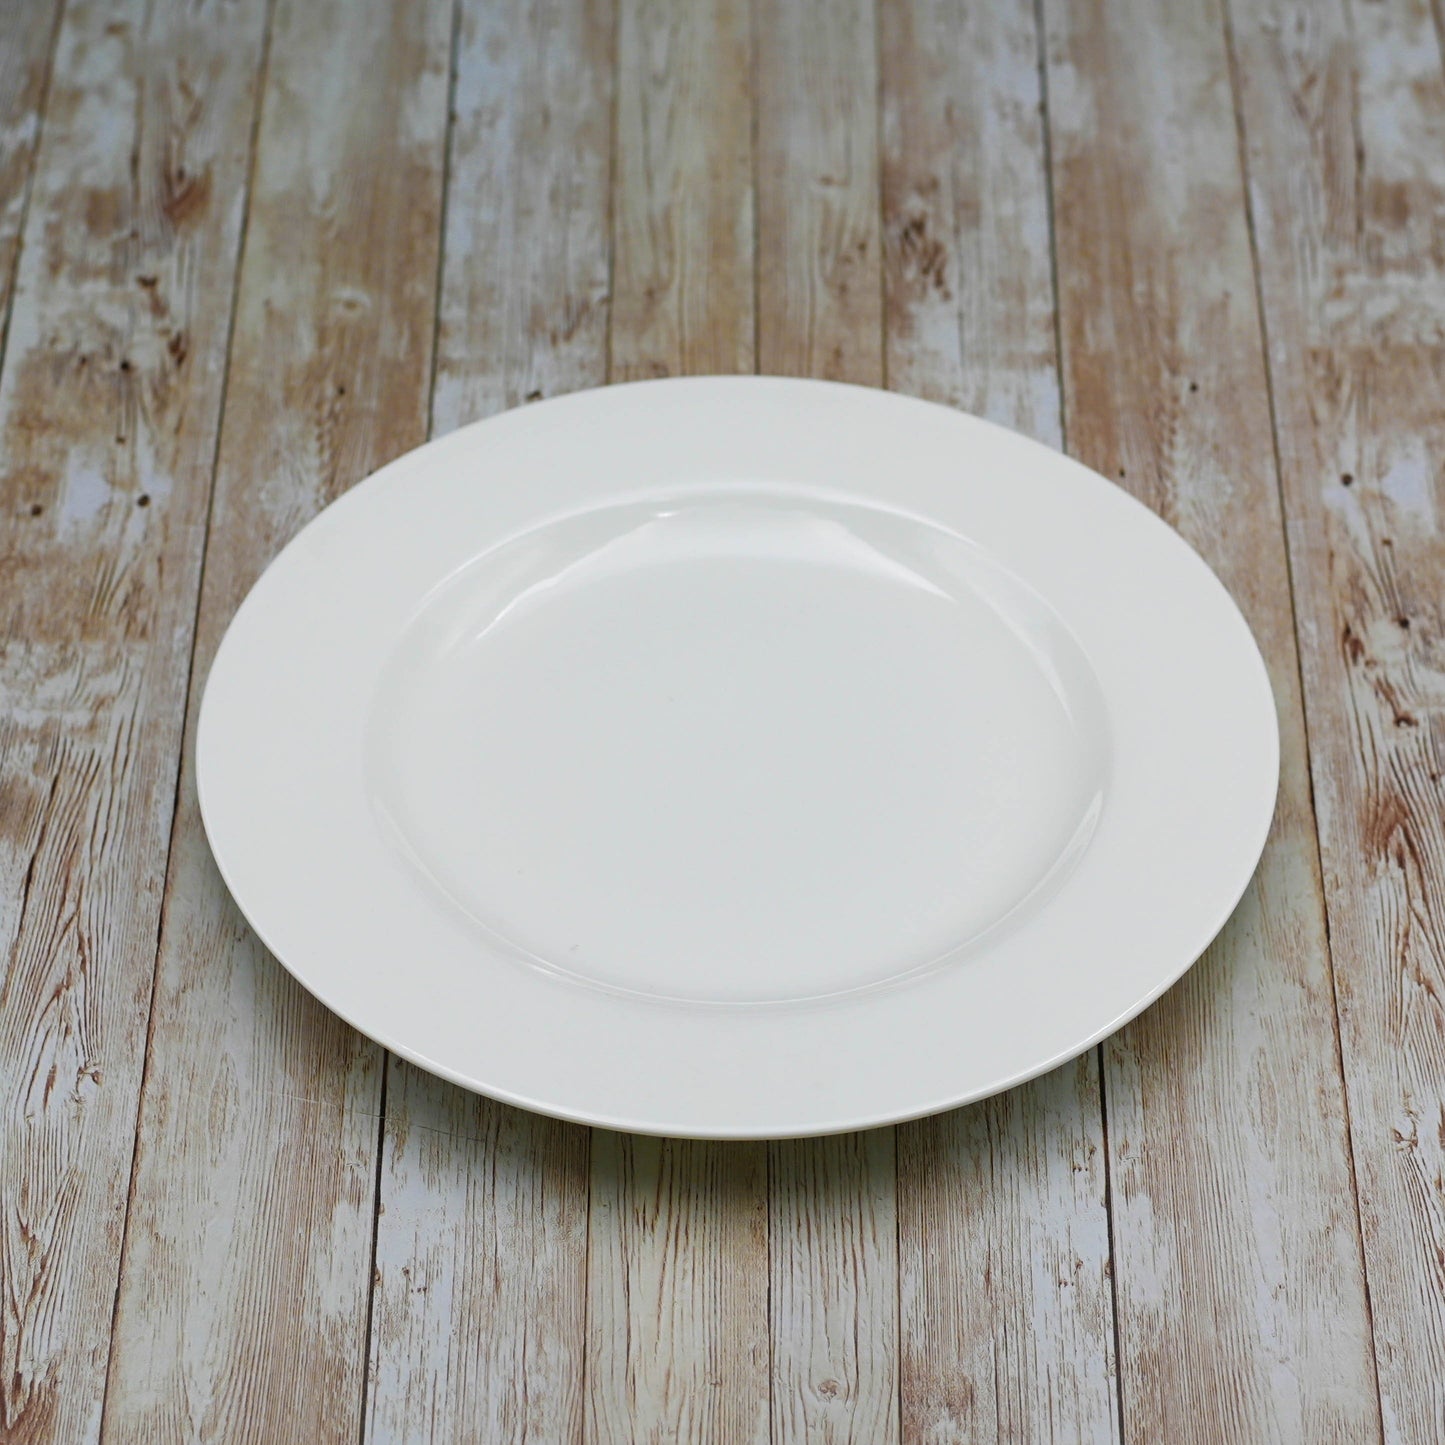 Professional Rolled Rim White Round Plate / Platter 12" inch |